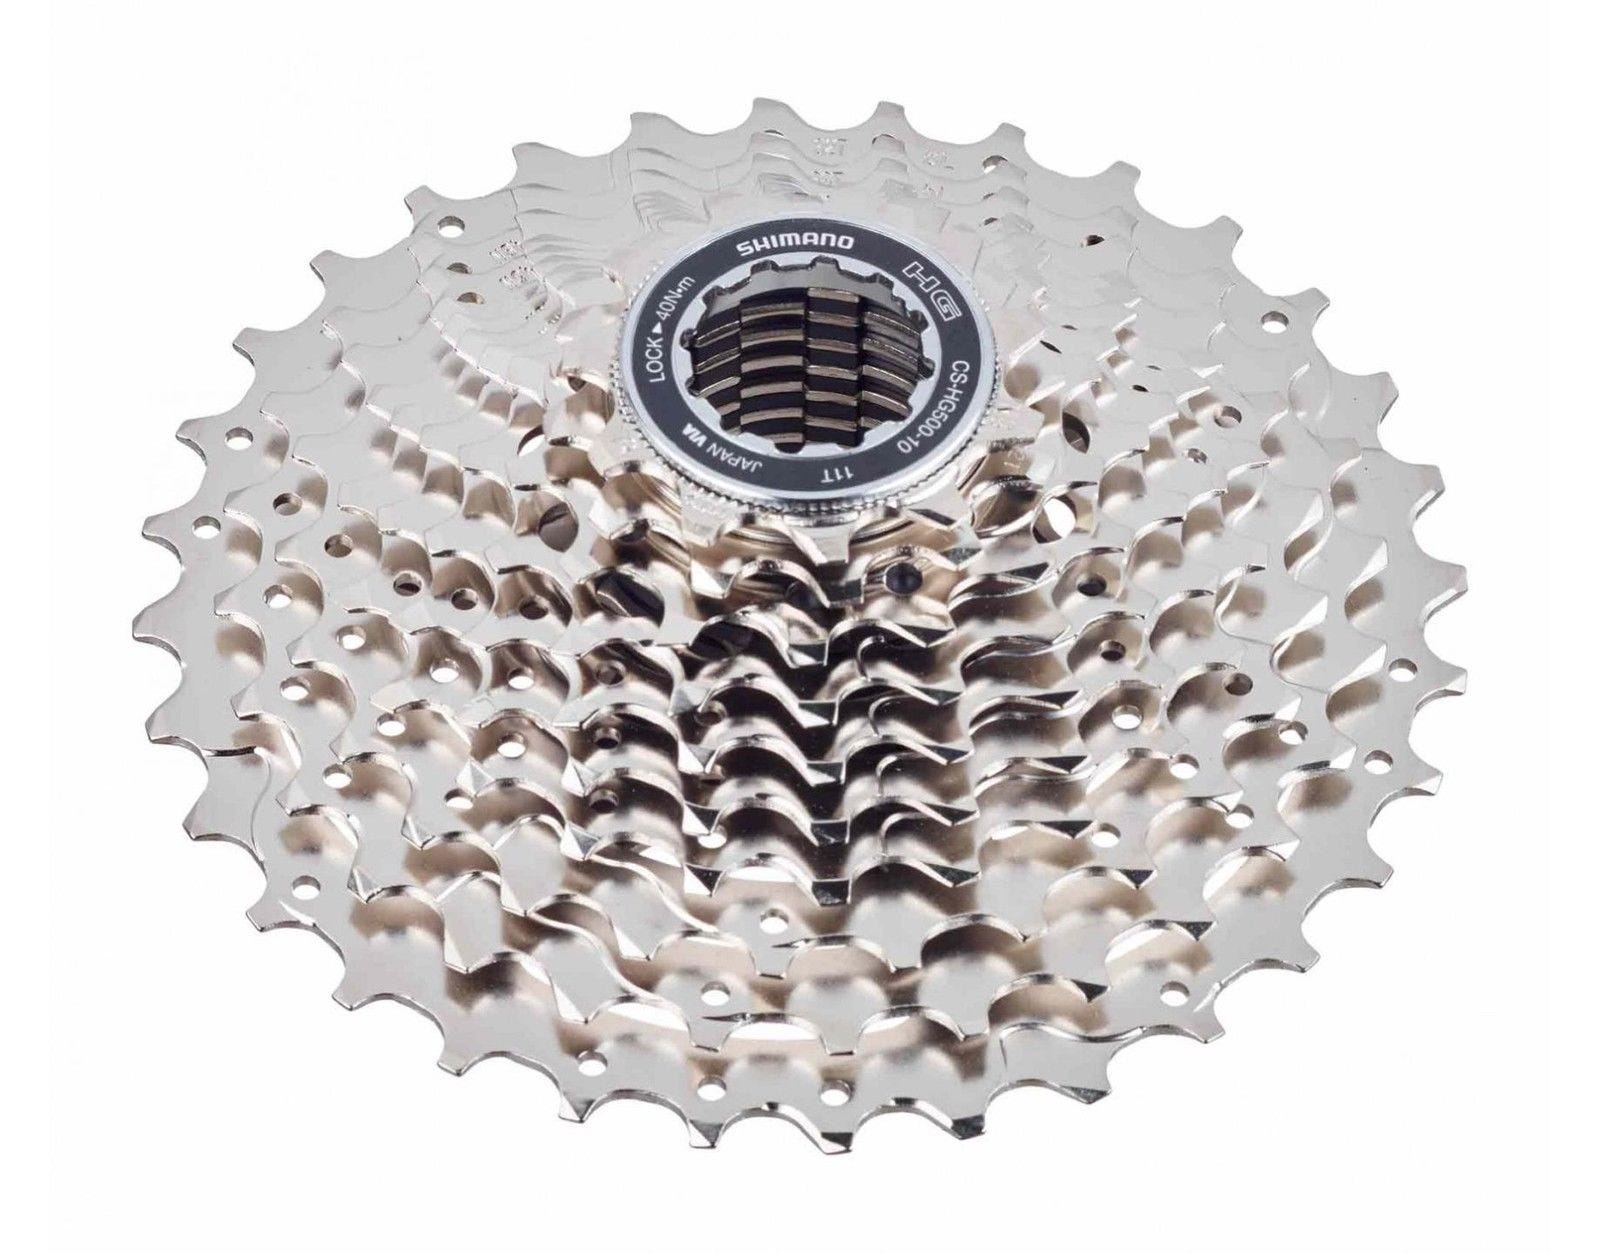 BUNDLE Shimano HG500 10 speed Cassette 11-34 Deore HG54 10sp Chain